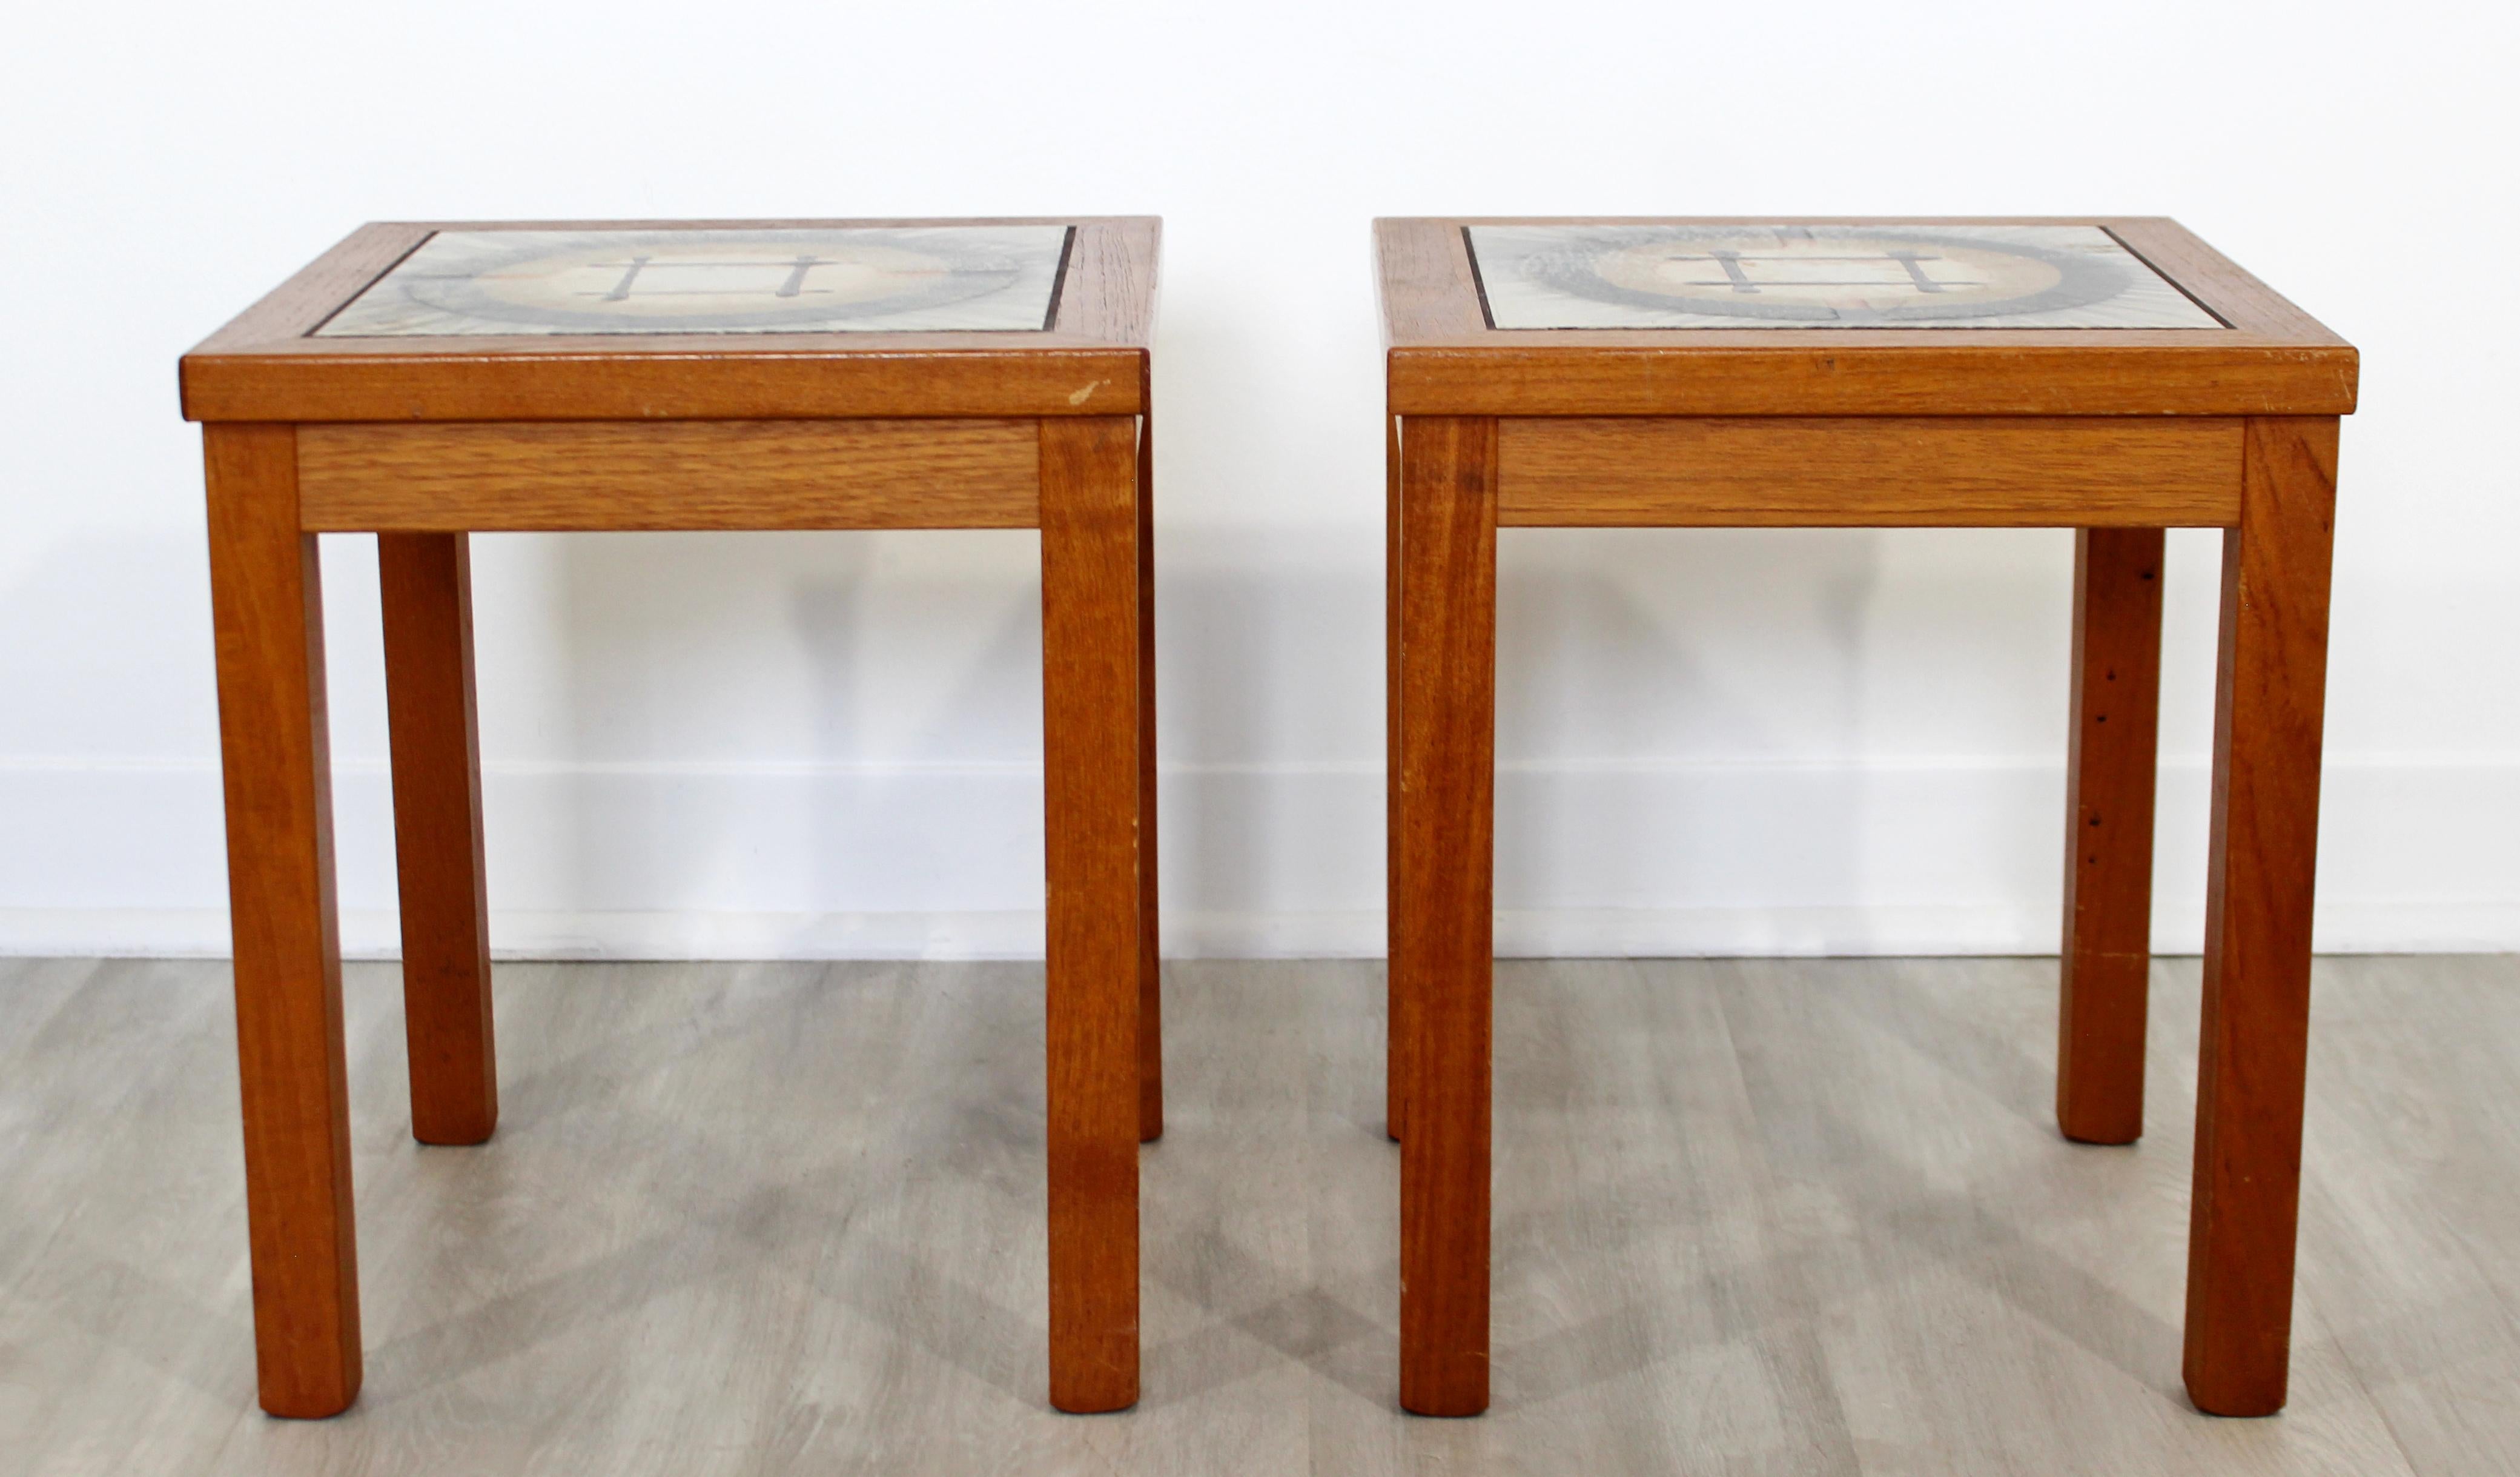 For your consideration is a wonderful pair of teak side or end tables, with tile tops, made in Denmark, circa 1960s. In very good vintage condition. The dimensions are 13